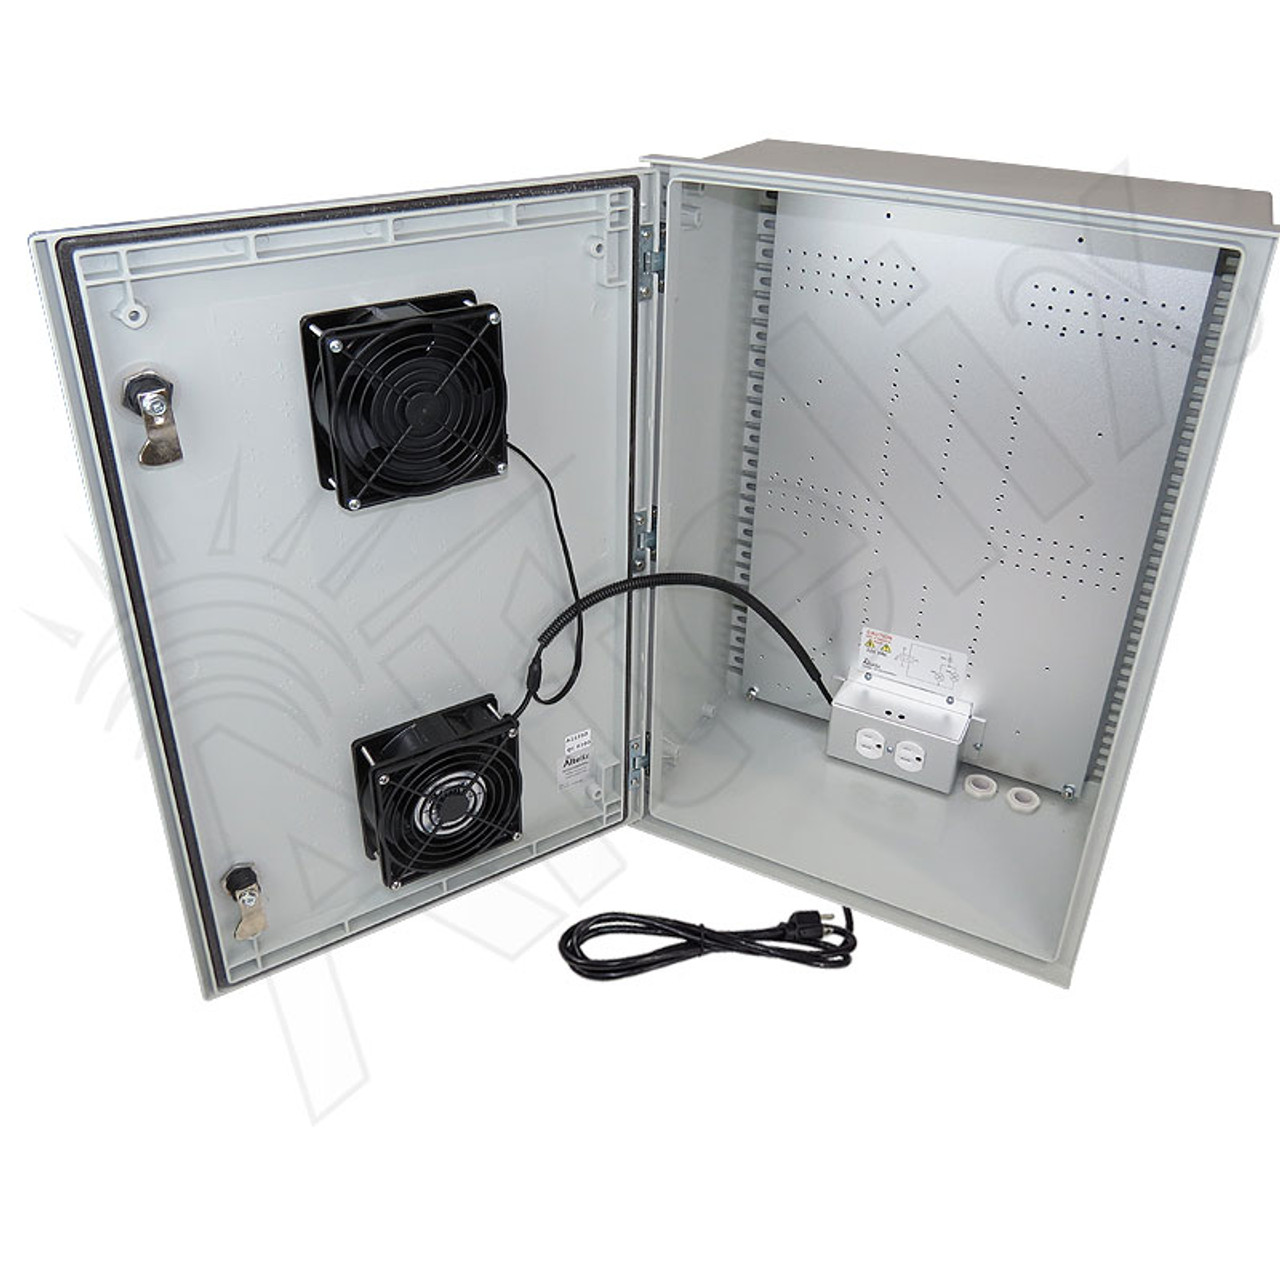 Altelix 24x16x9 Vented Fiberglass Weatherproof NEMA Enclosure with 120 VAC  Outlets, Power Cord & Dual 85°F Turn-On Cooling Fans